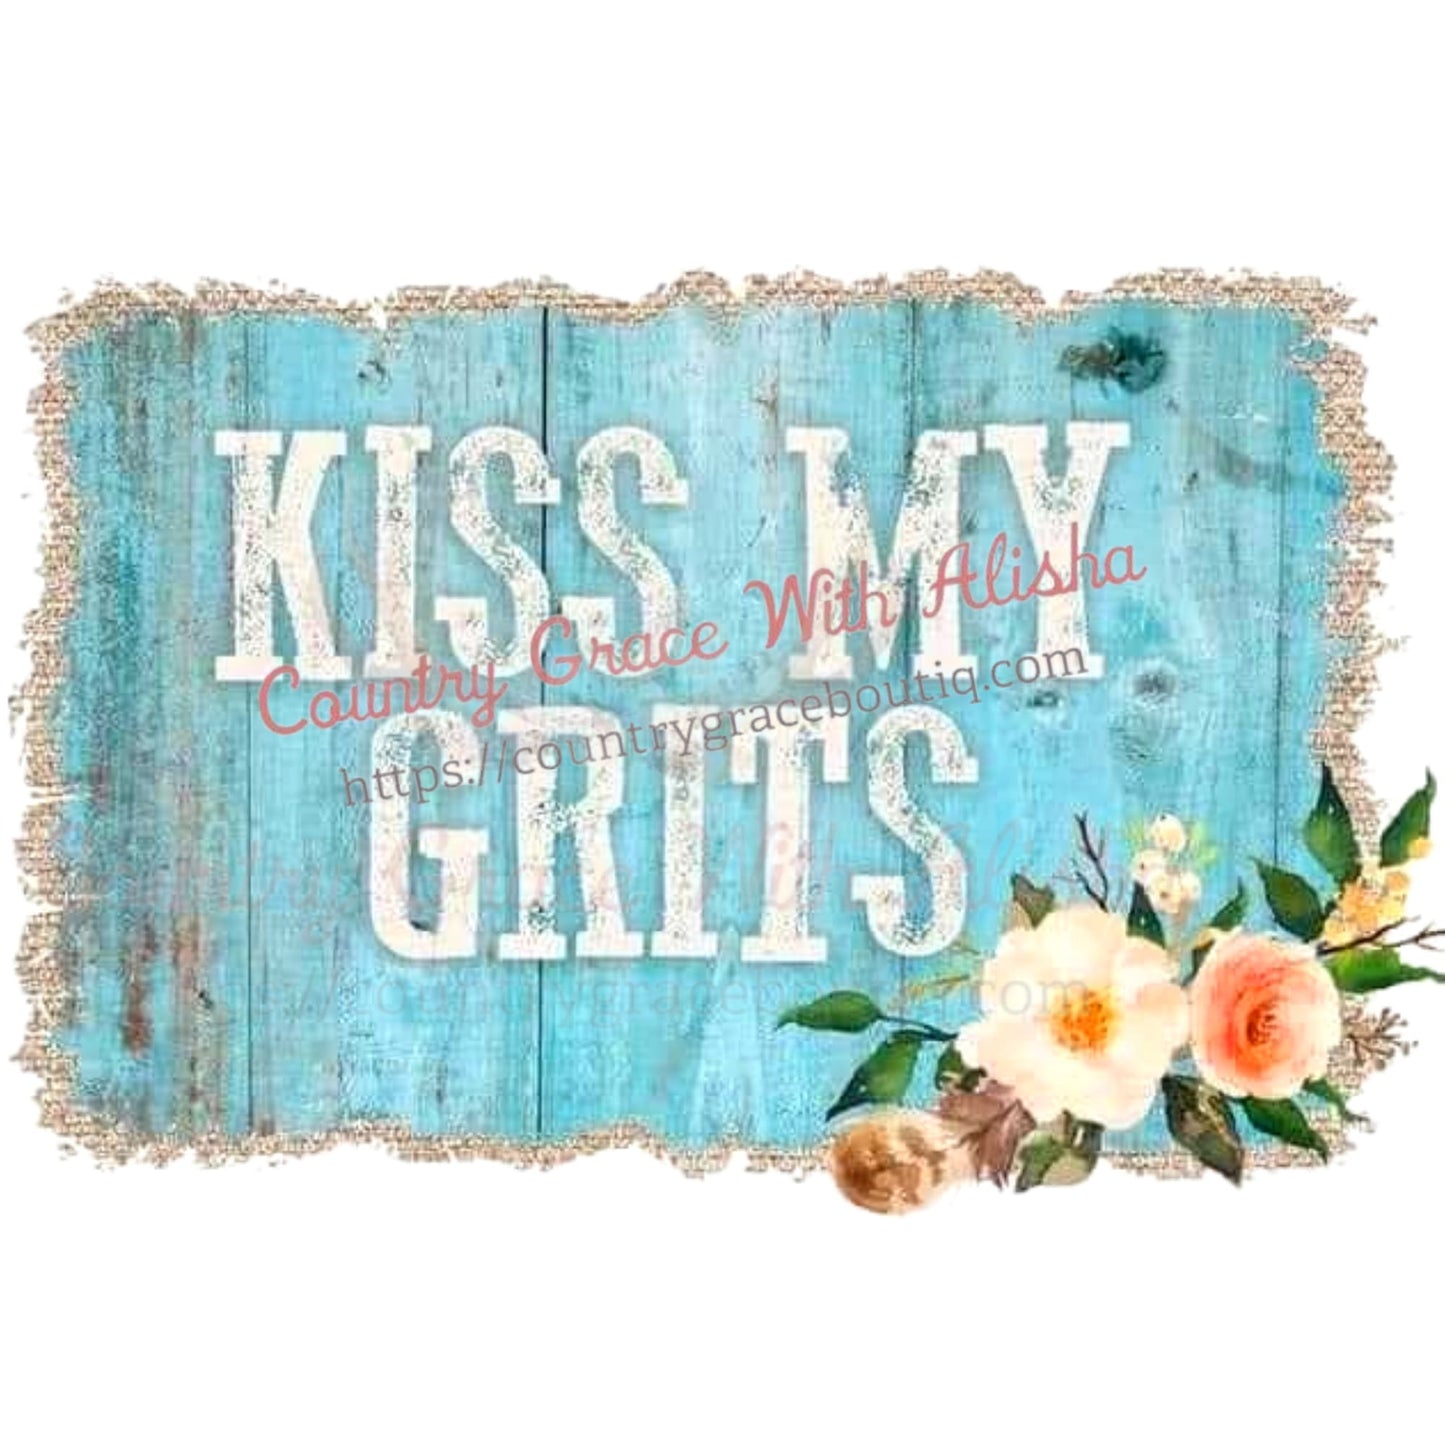 Kiss My Grits Sublimation Transfer - Sub $1.50 Country Grace